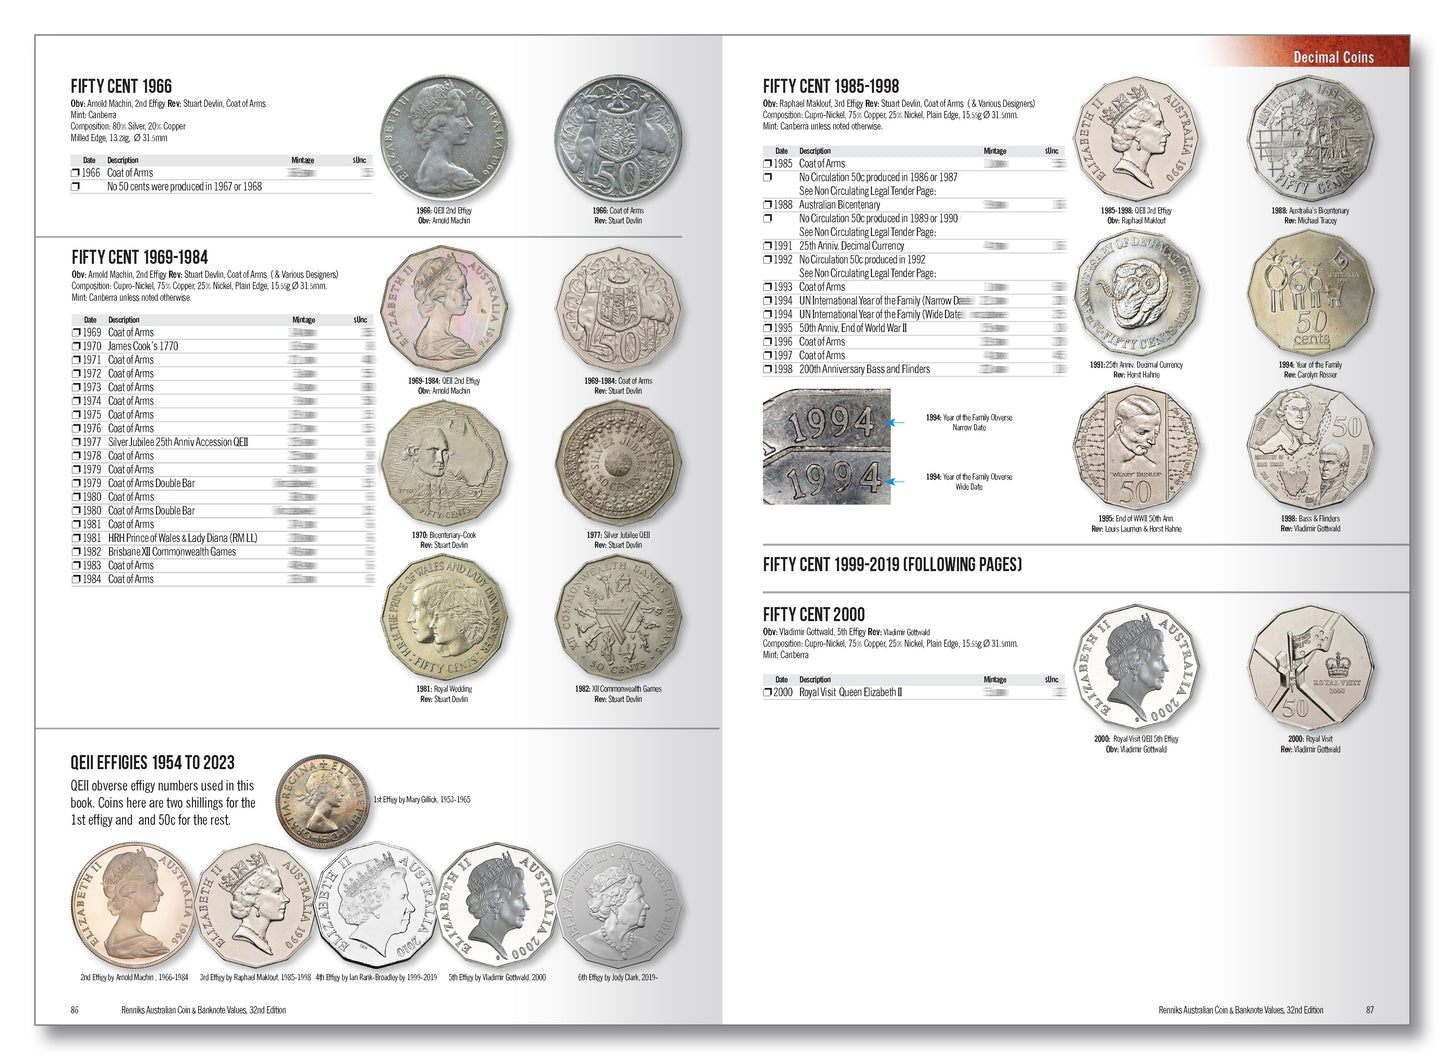 Renniks Australian Coin & Banknote Values 32nd Edition - Softcover